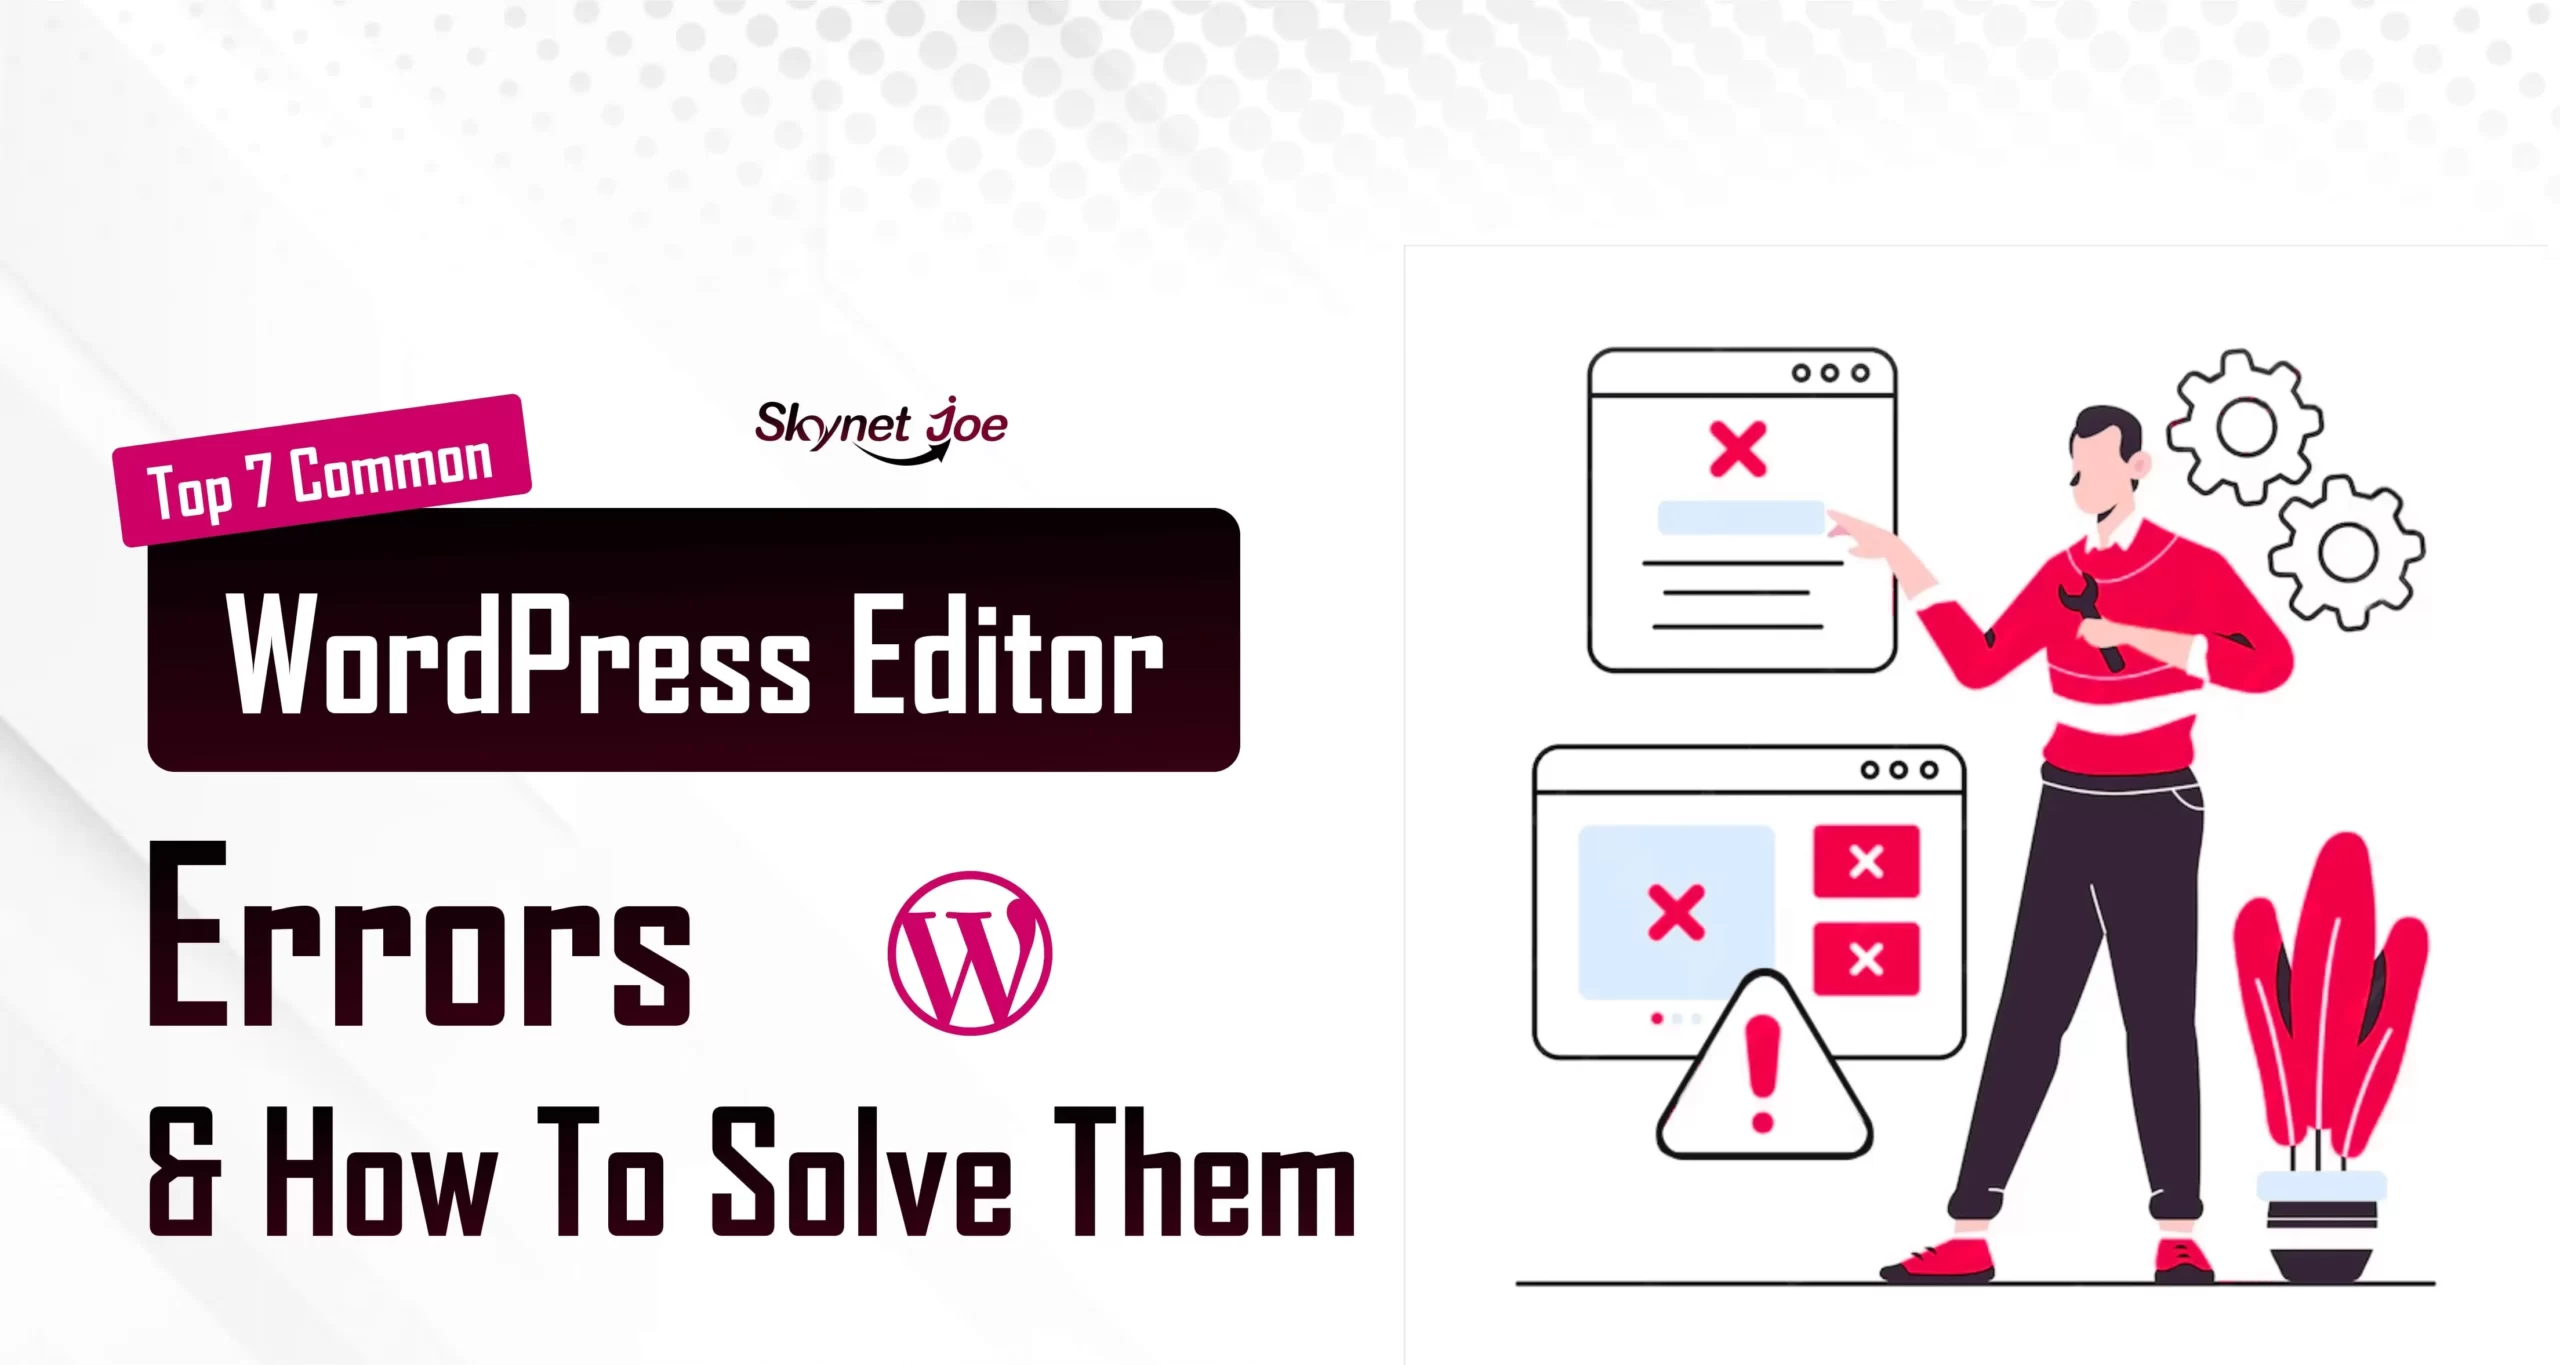 WordPress editor error illustration: Character encountering issues. Learn about the top 7 common wordpress editor errors and effective solutions for seamless editing